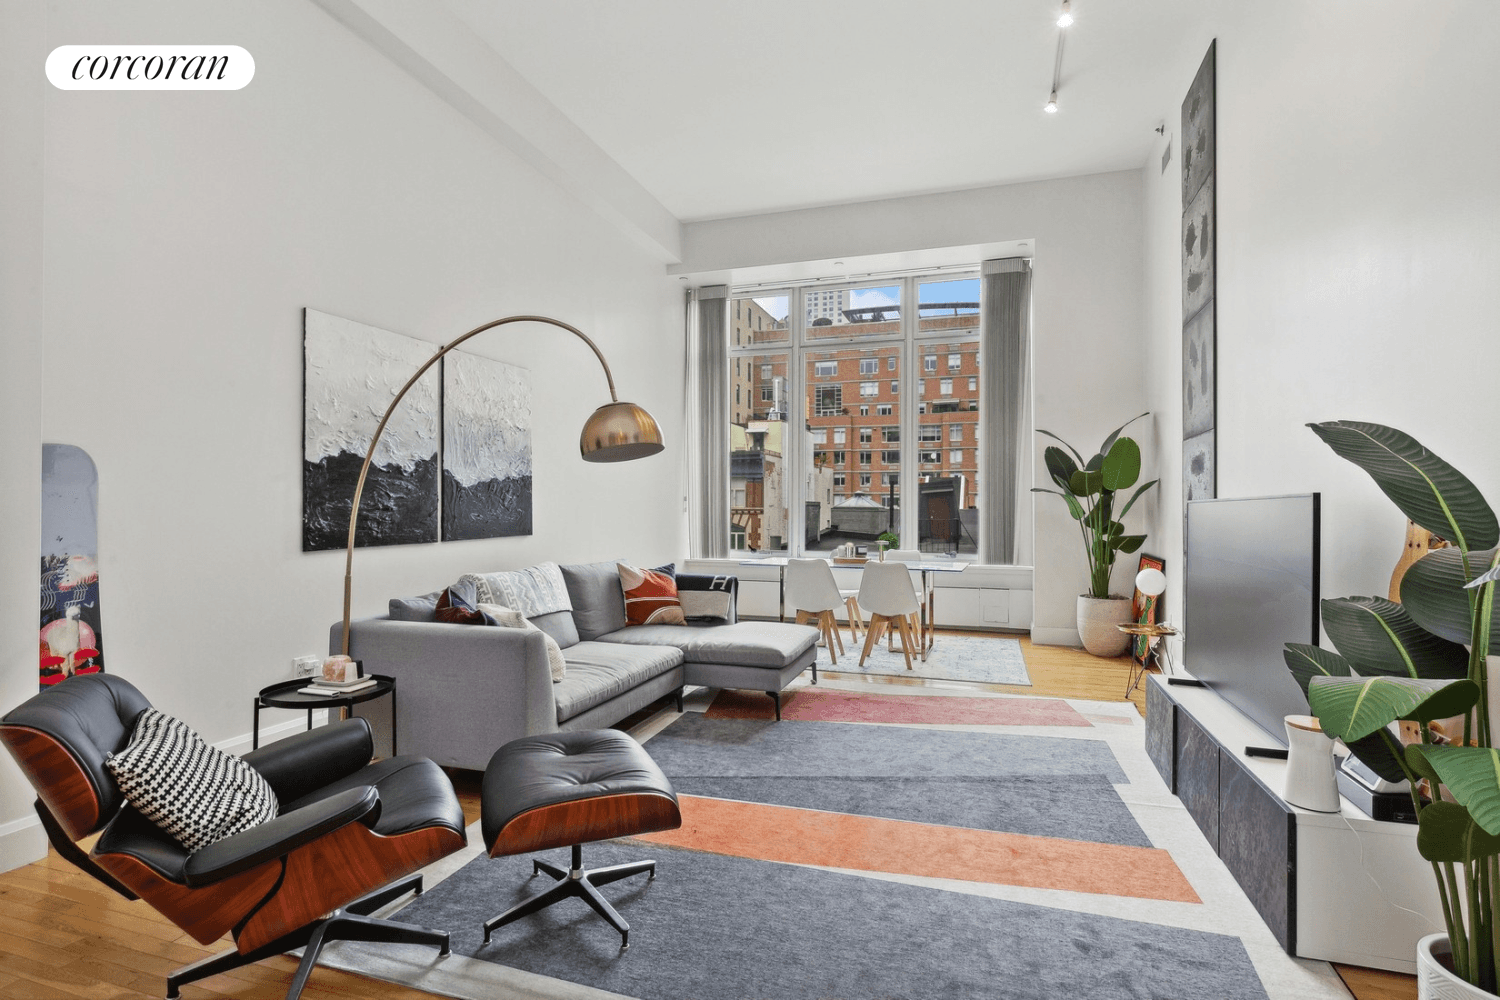 Residence 5A at 121 West 19th Street is a remarkable loft rental in the heart of Chelsea and Flatiron.